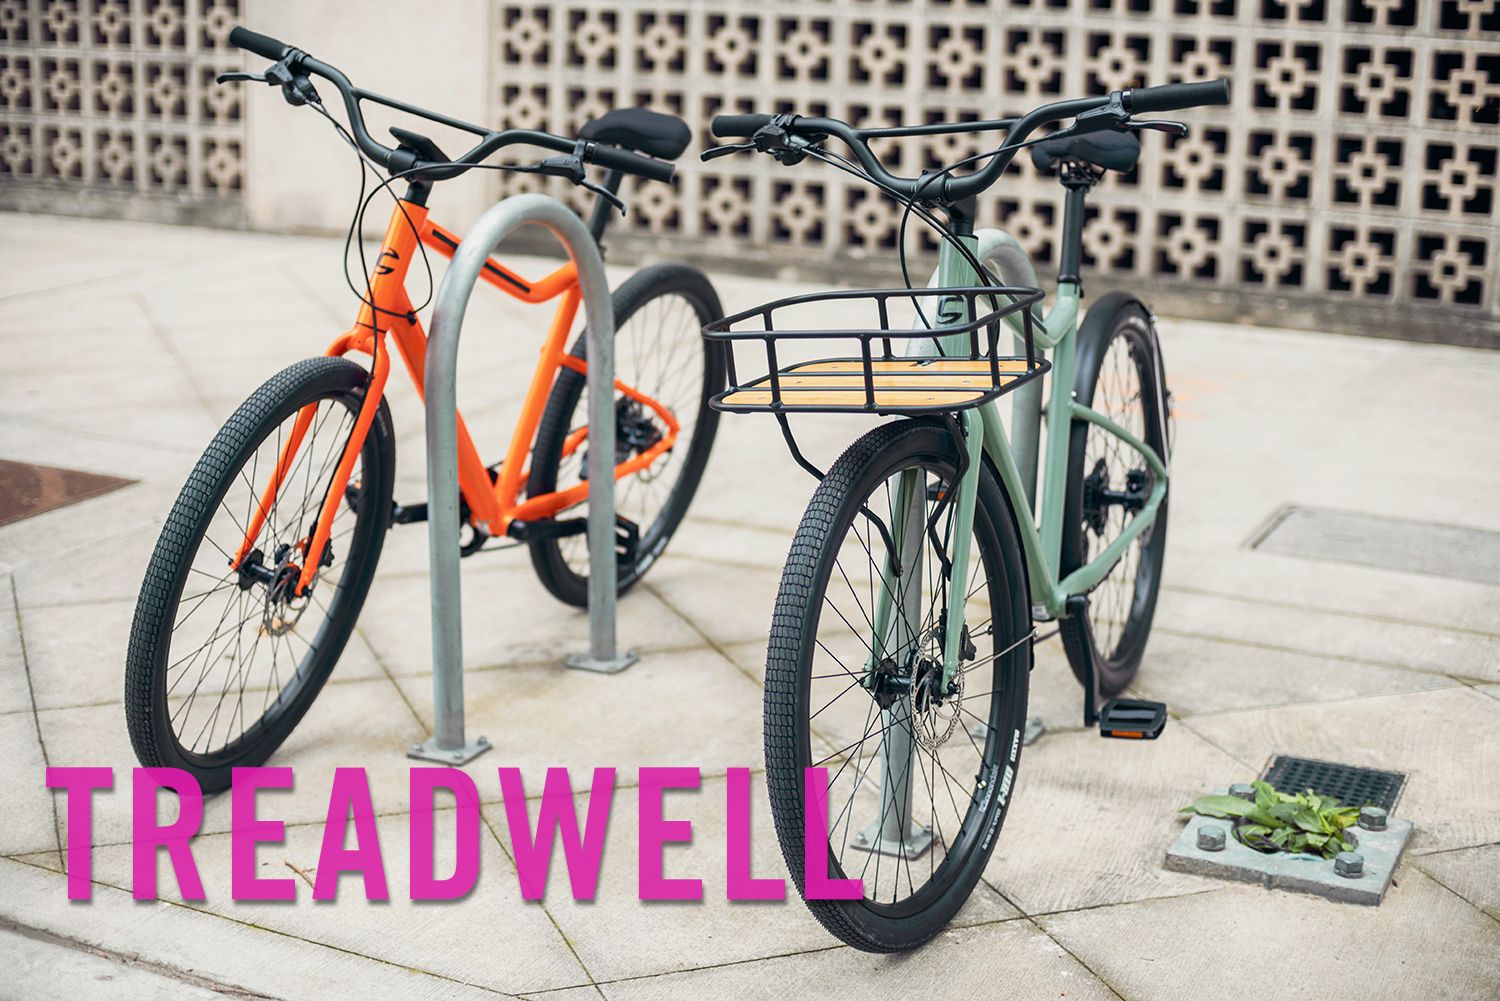  Cannondale Treadwell, Your Everyday Bike